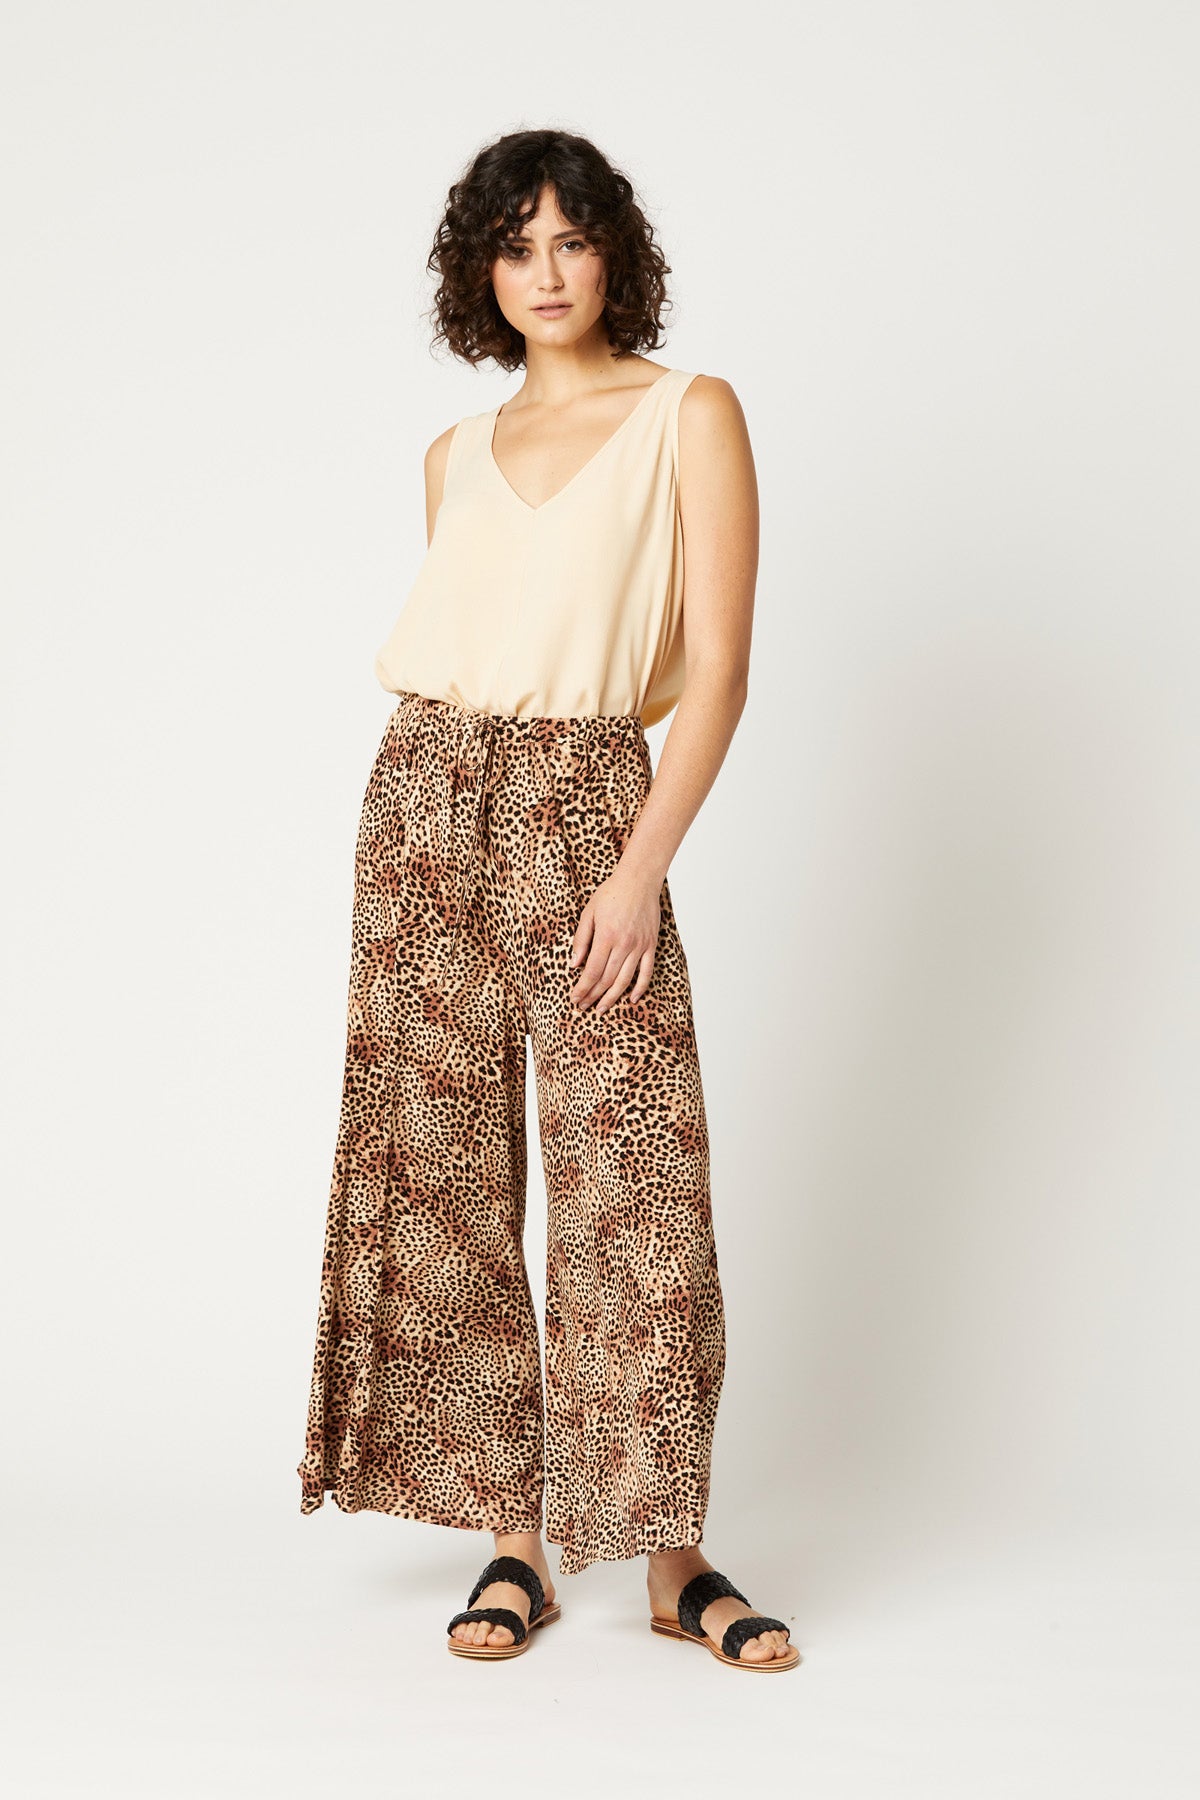 Lioness Pant - Cheetah - eb&ive Clothing - Pant Relaxed Casual